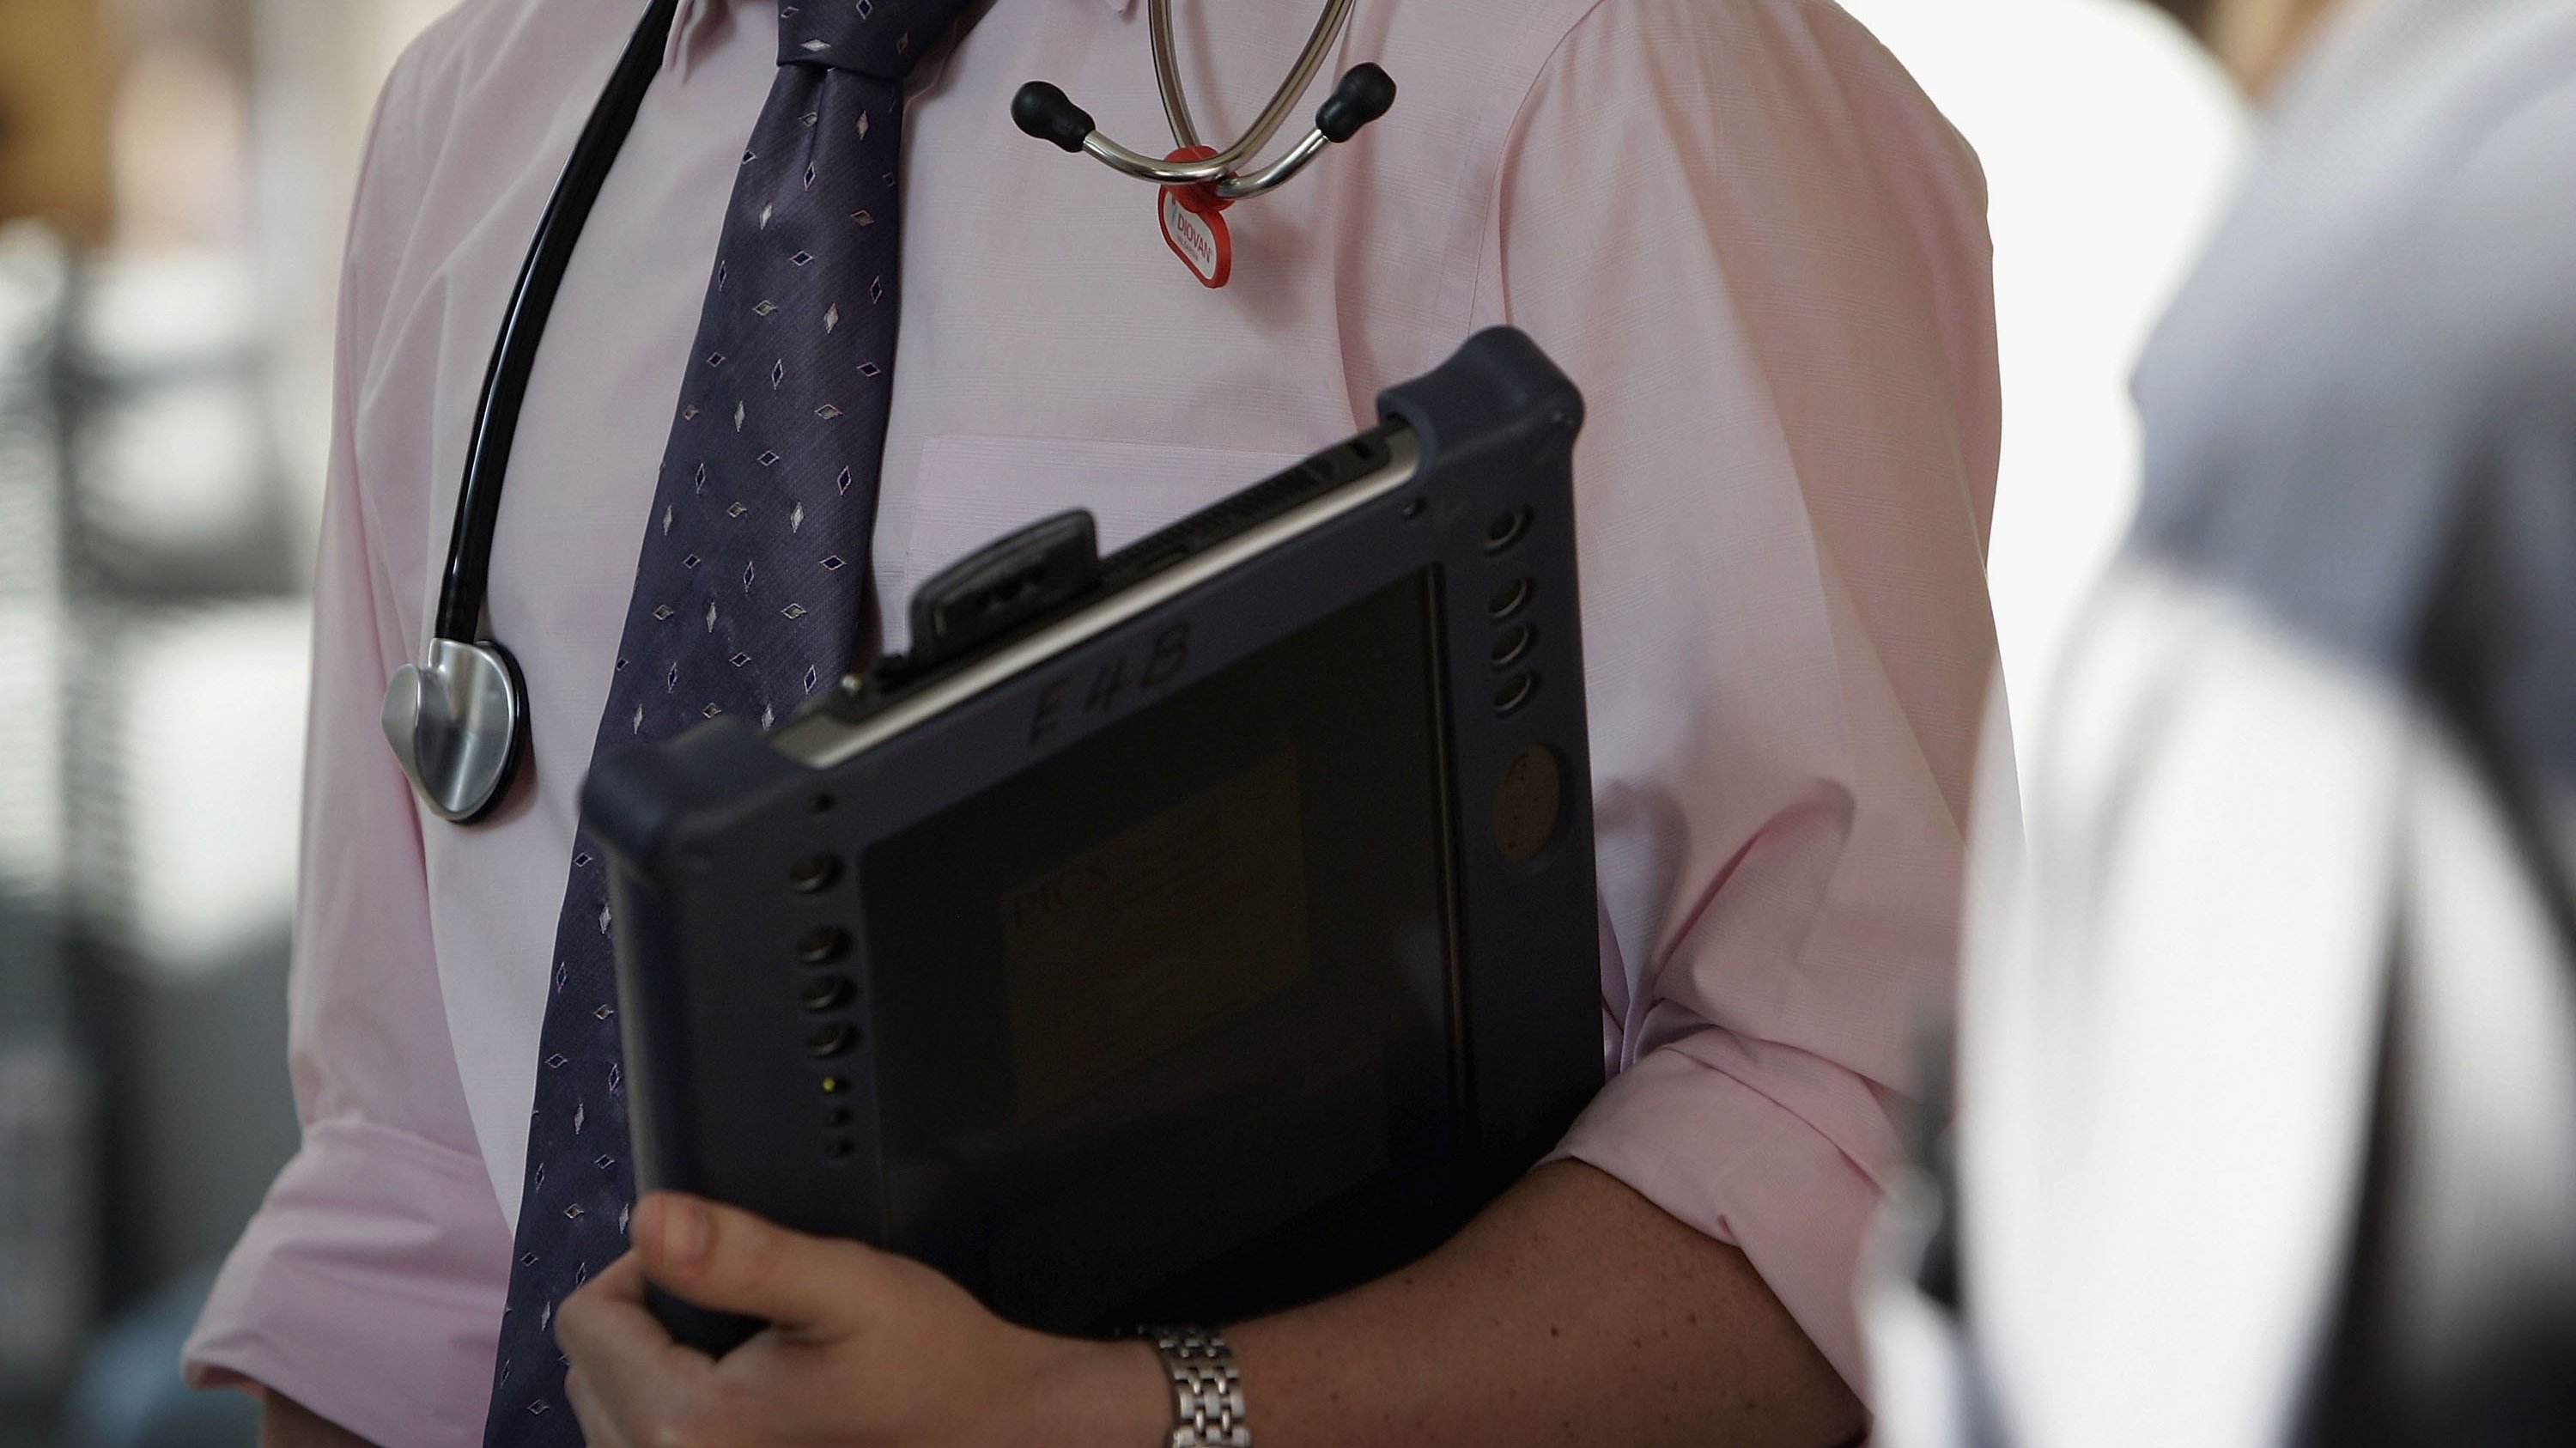 NHS Healthcare Organisation Looks To The Future